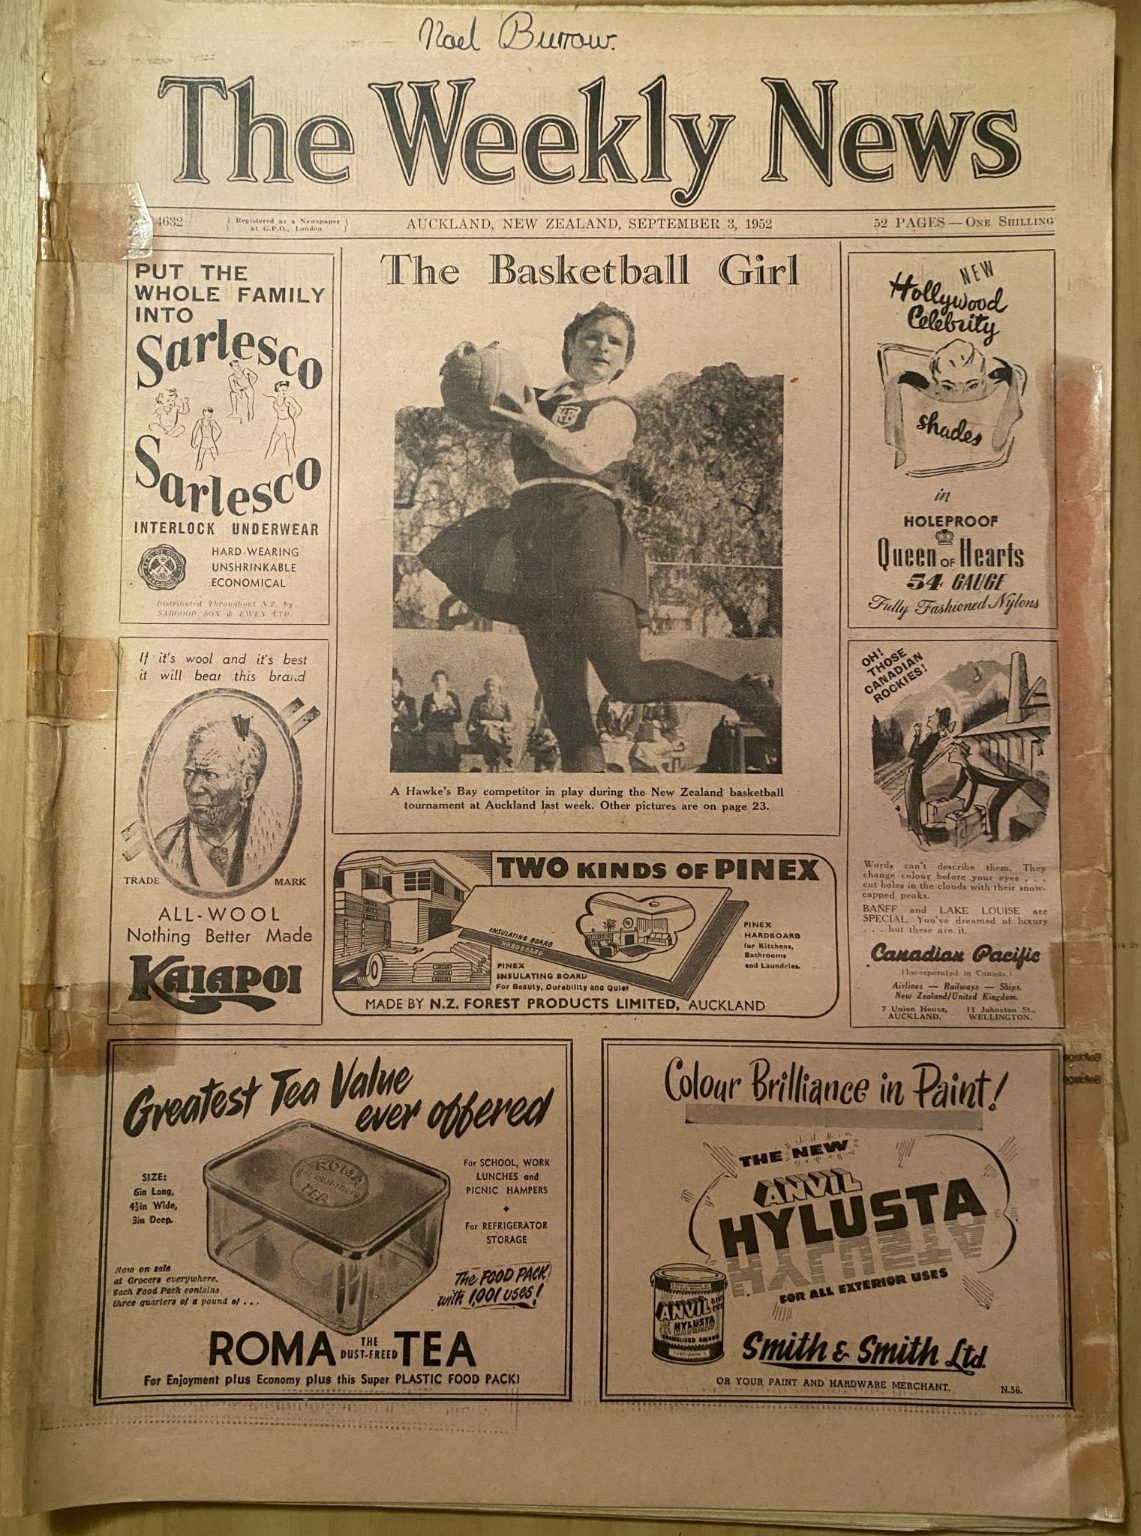 OLD NEWSPAPER: The Weekly News - No. 4632, 3 September 1952